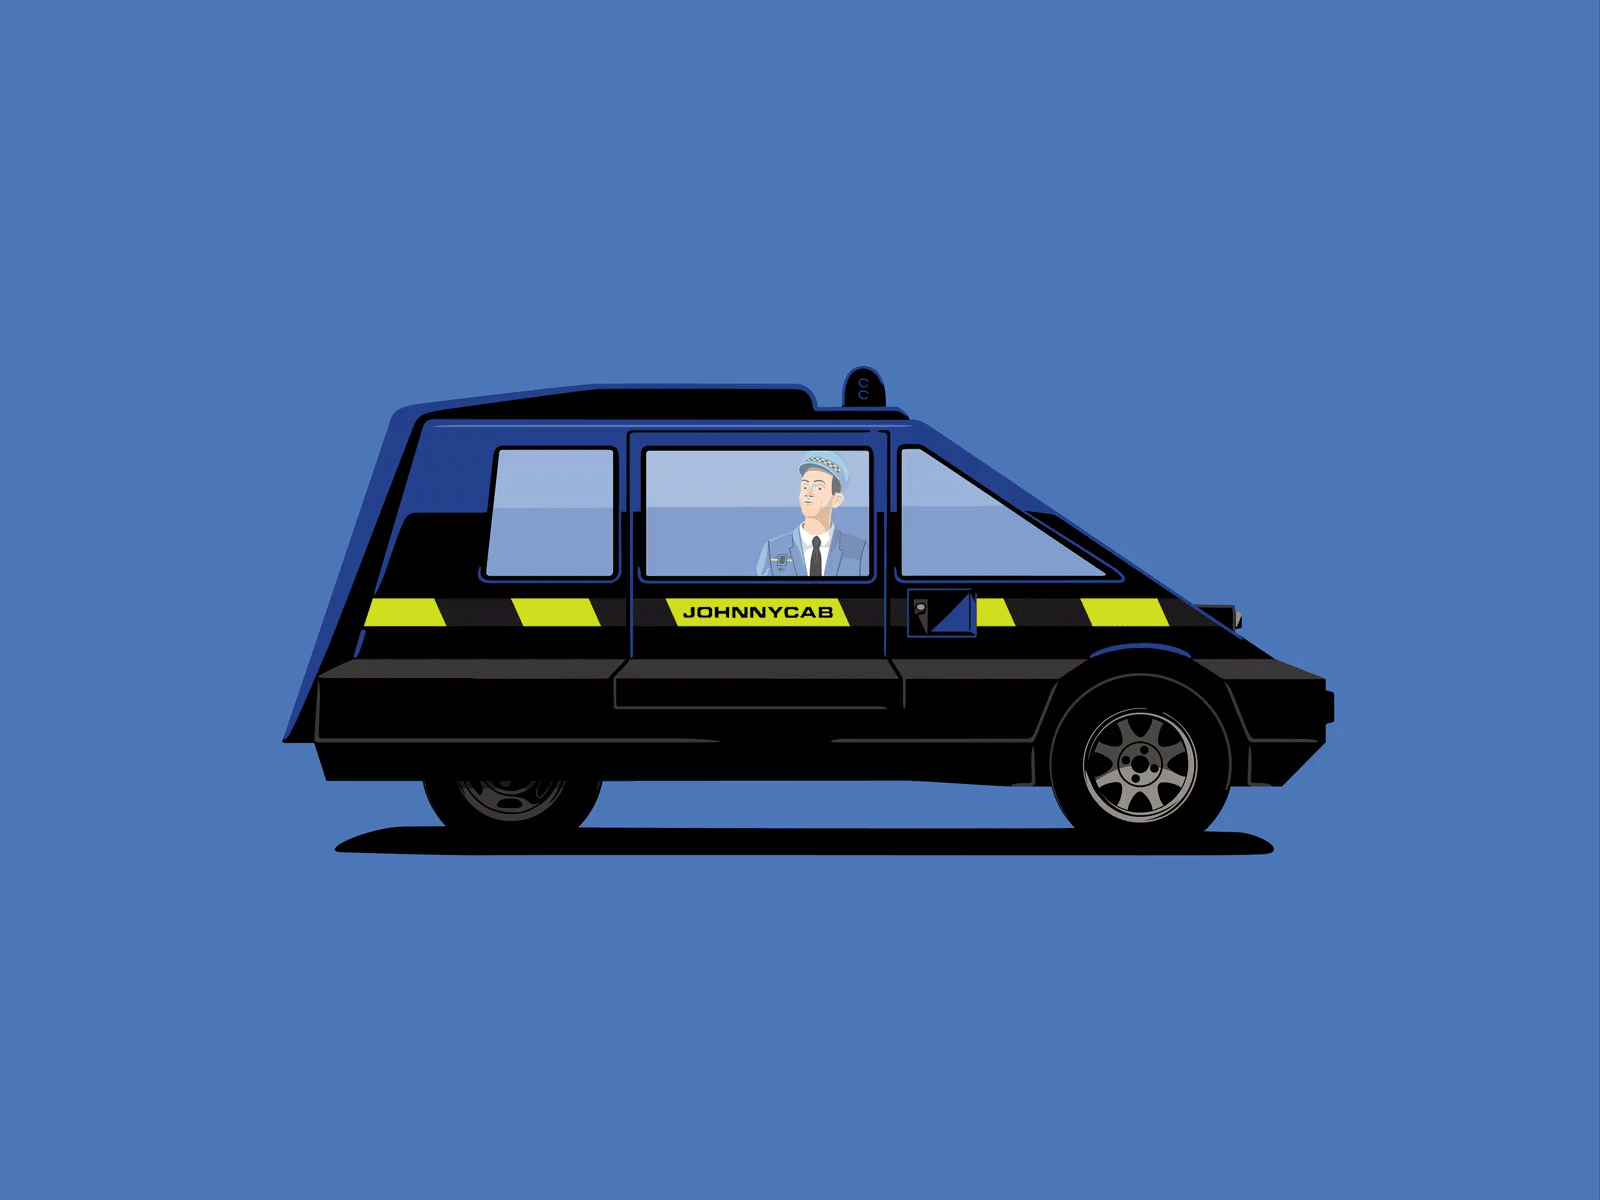 Johnny Cab Total Recall - Movie Cars #3 adobe after effects adobe illustrator animation cars flat illustration johnny cab minimal movies total recall vector